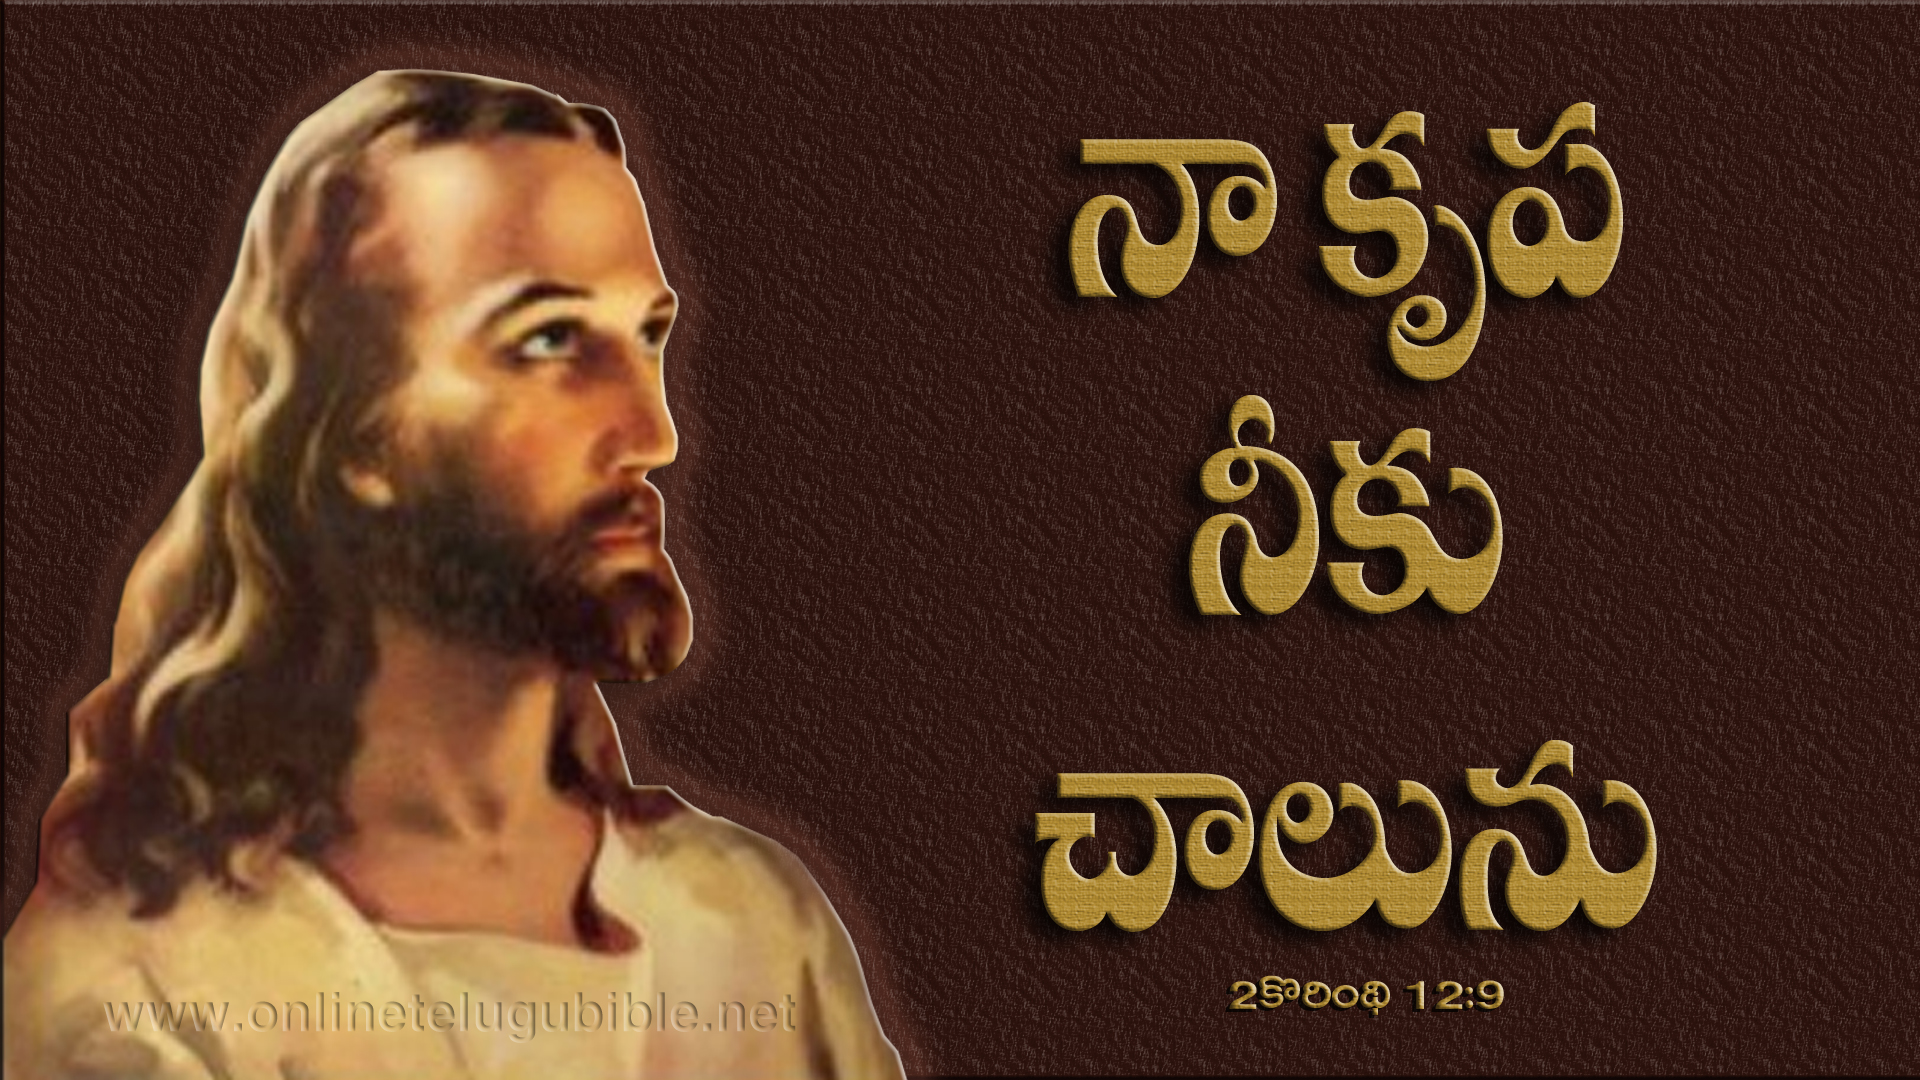 Bible Literature Ministry - Bible Verses Wallpapers